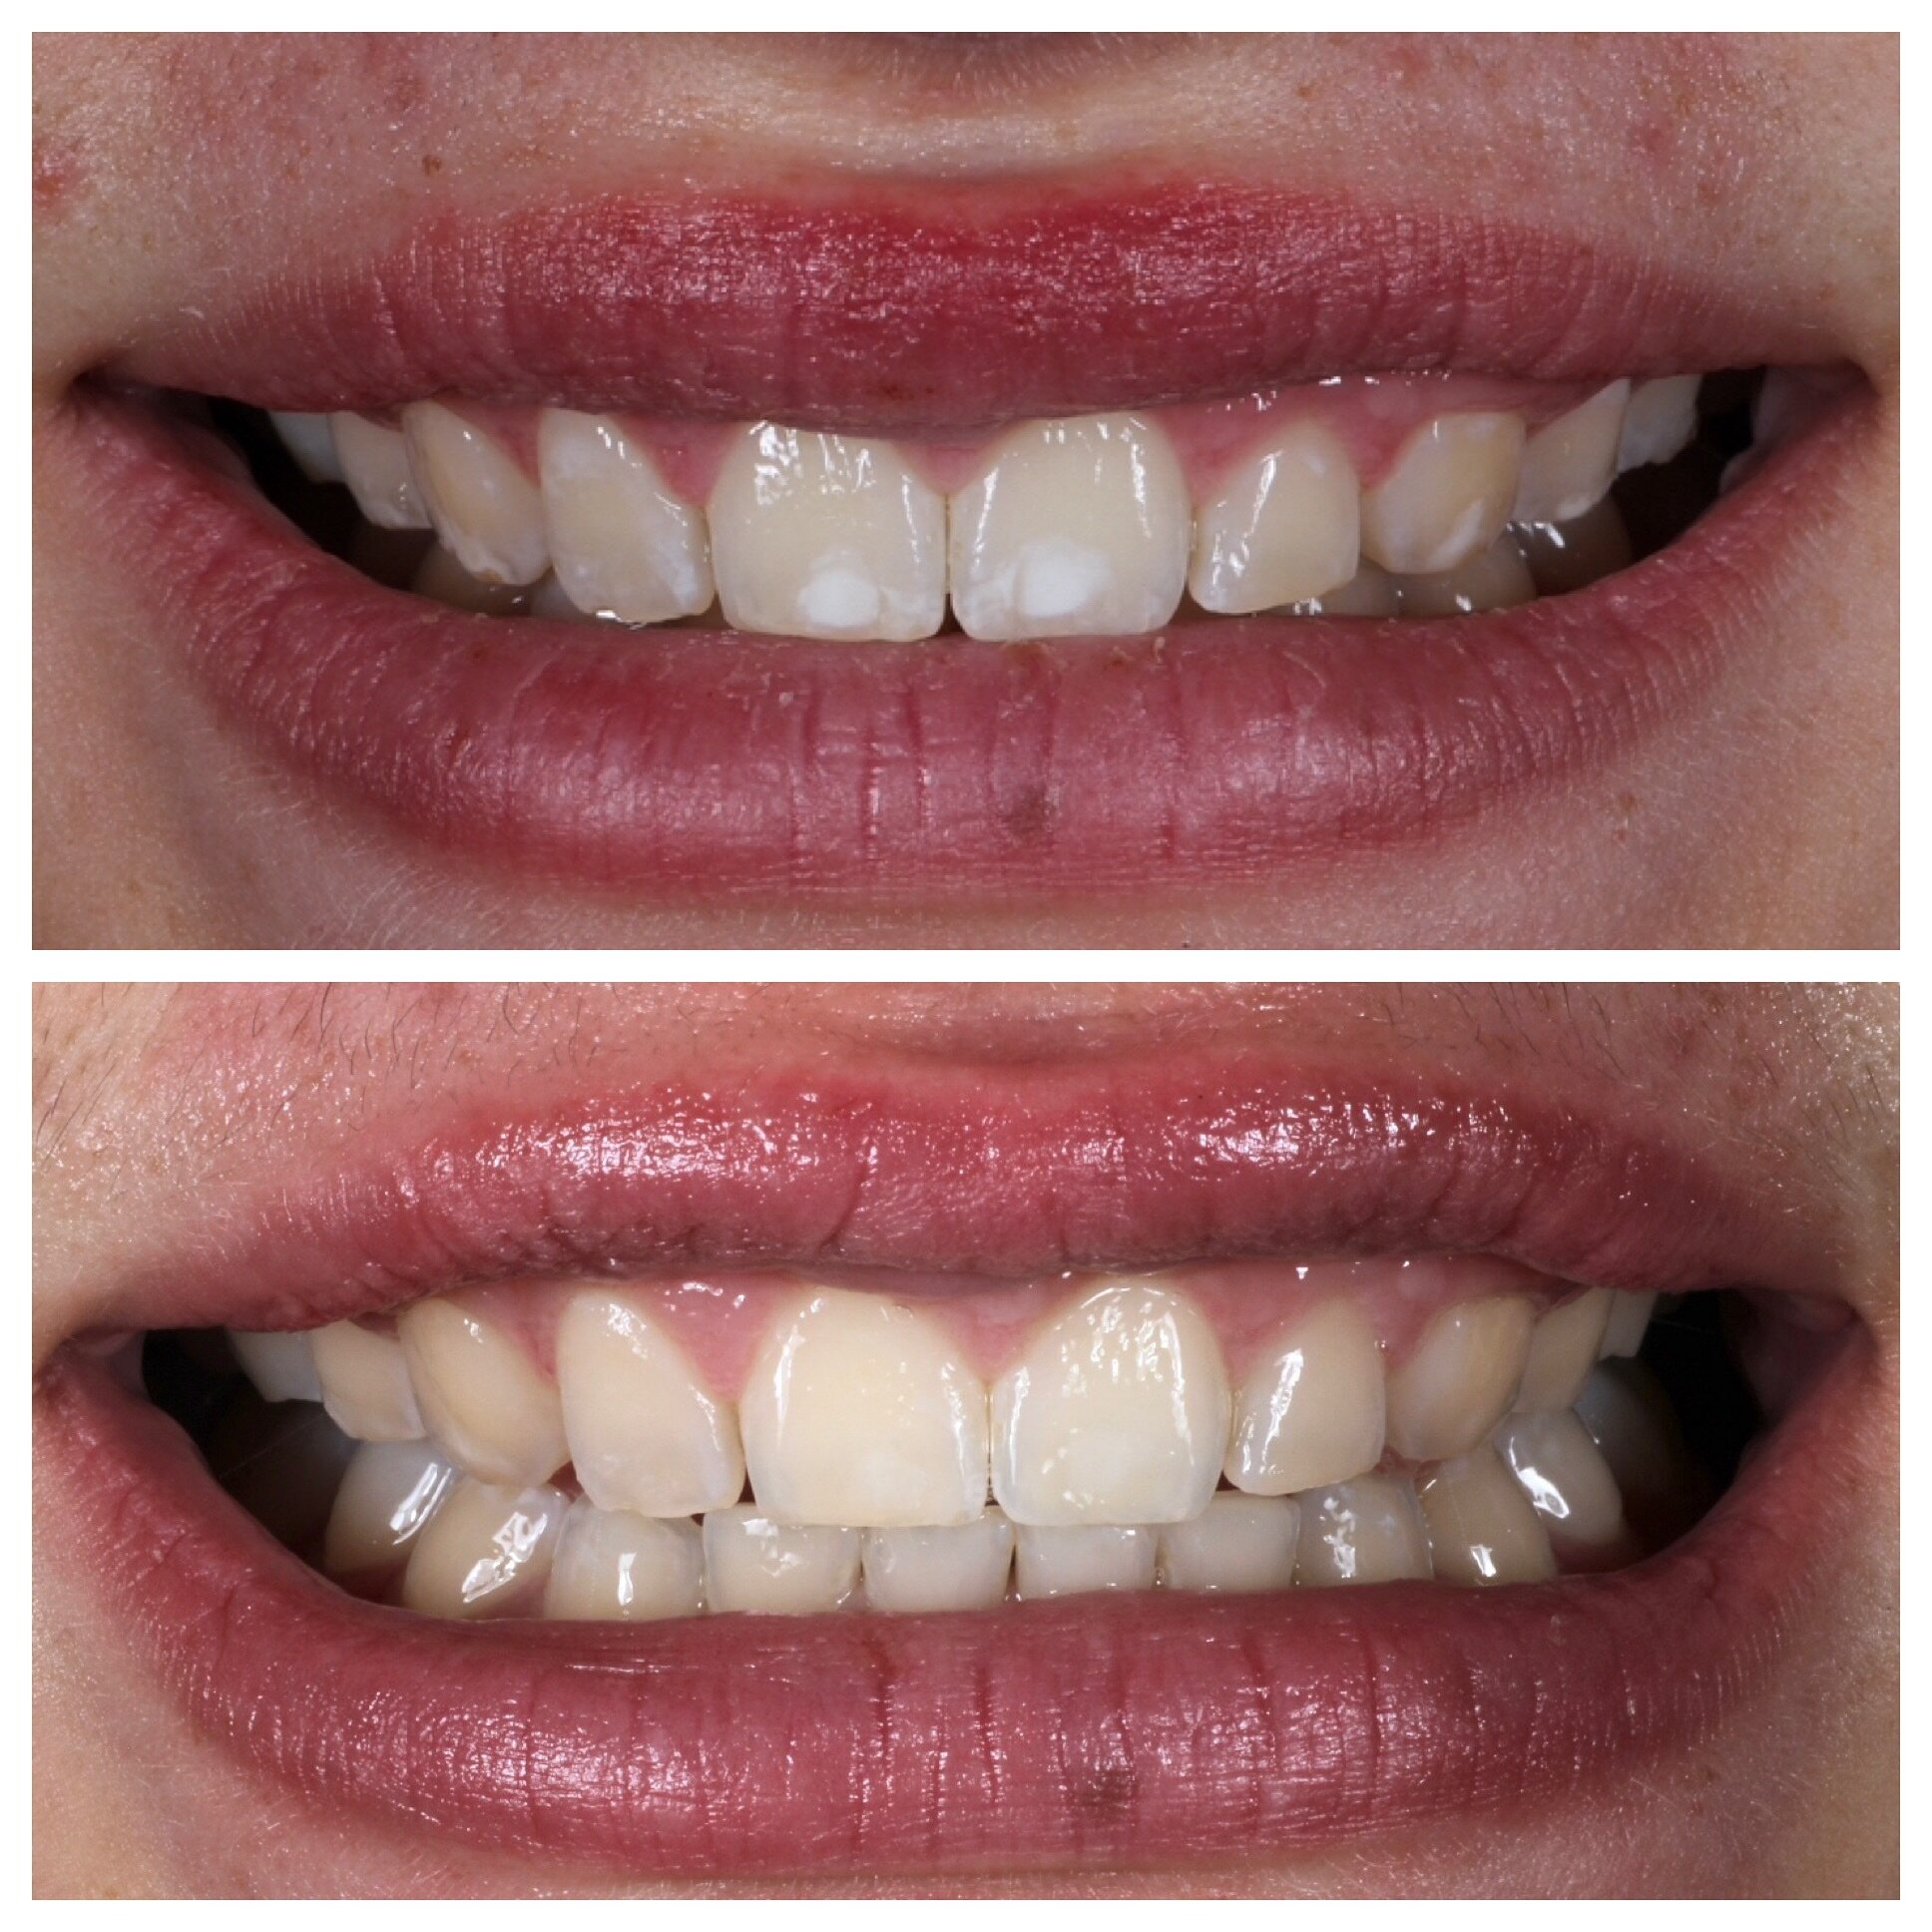 Transform your smile with ICON treatment! 🪄

Our innovative approach gently treats dental fluorosis and decalcification (white spots), giving you a brighter and more even smile without drilling. Check out the remarkable difference just one session c